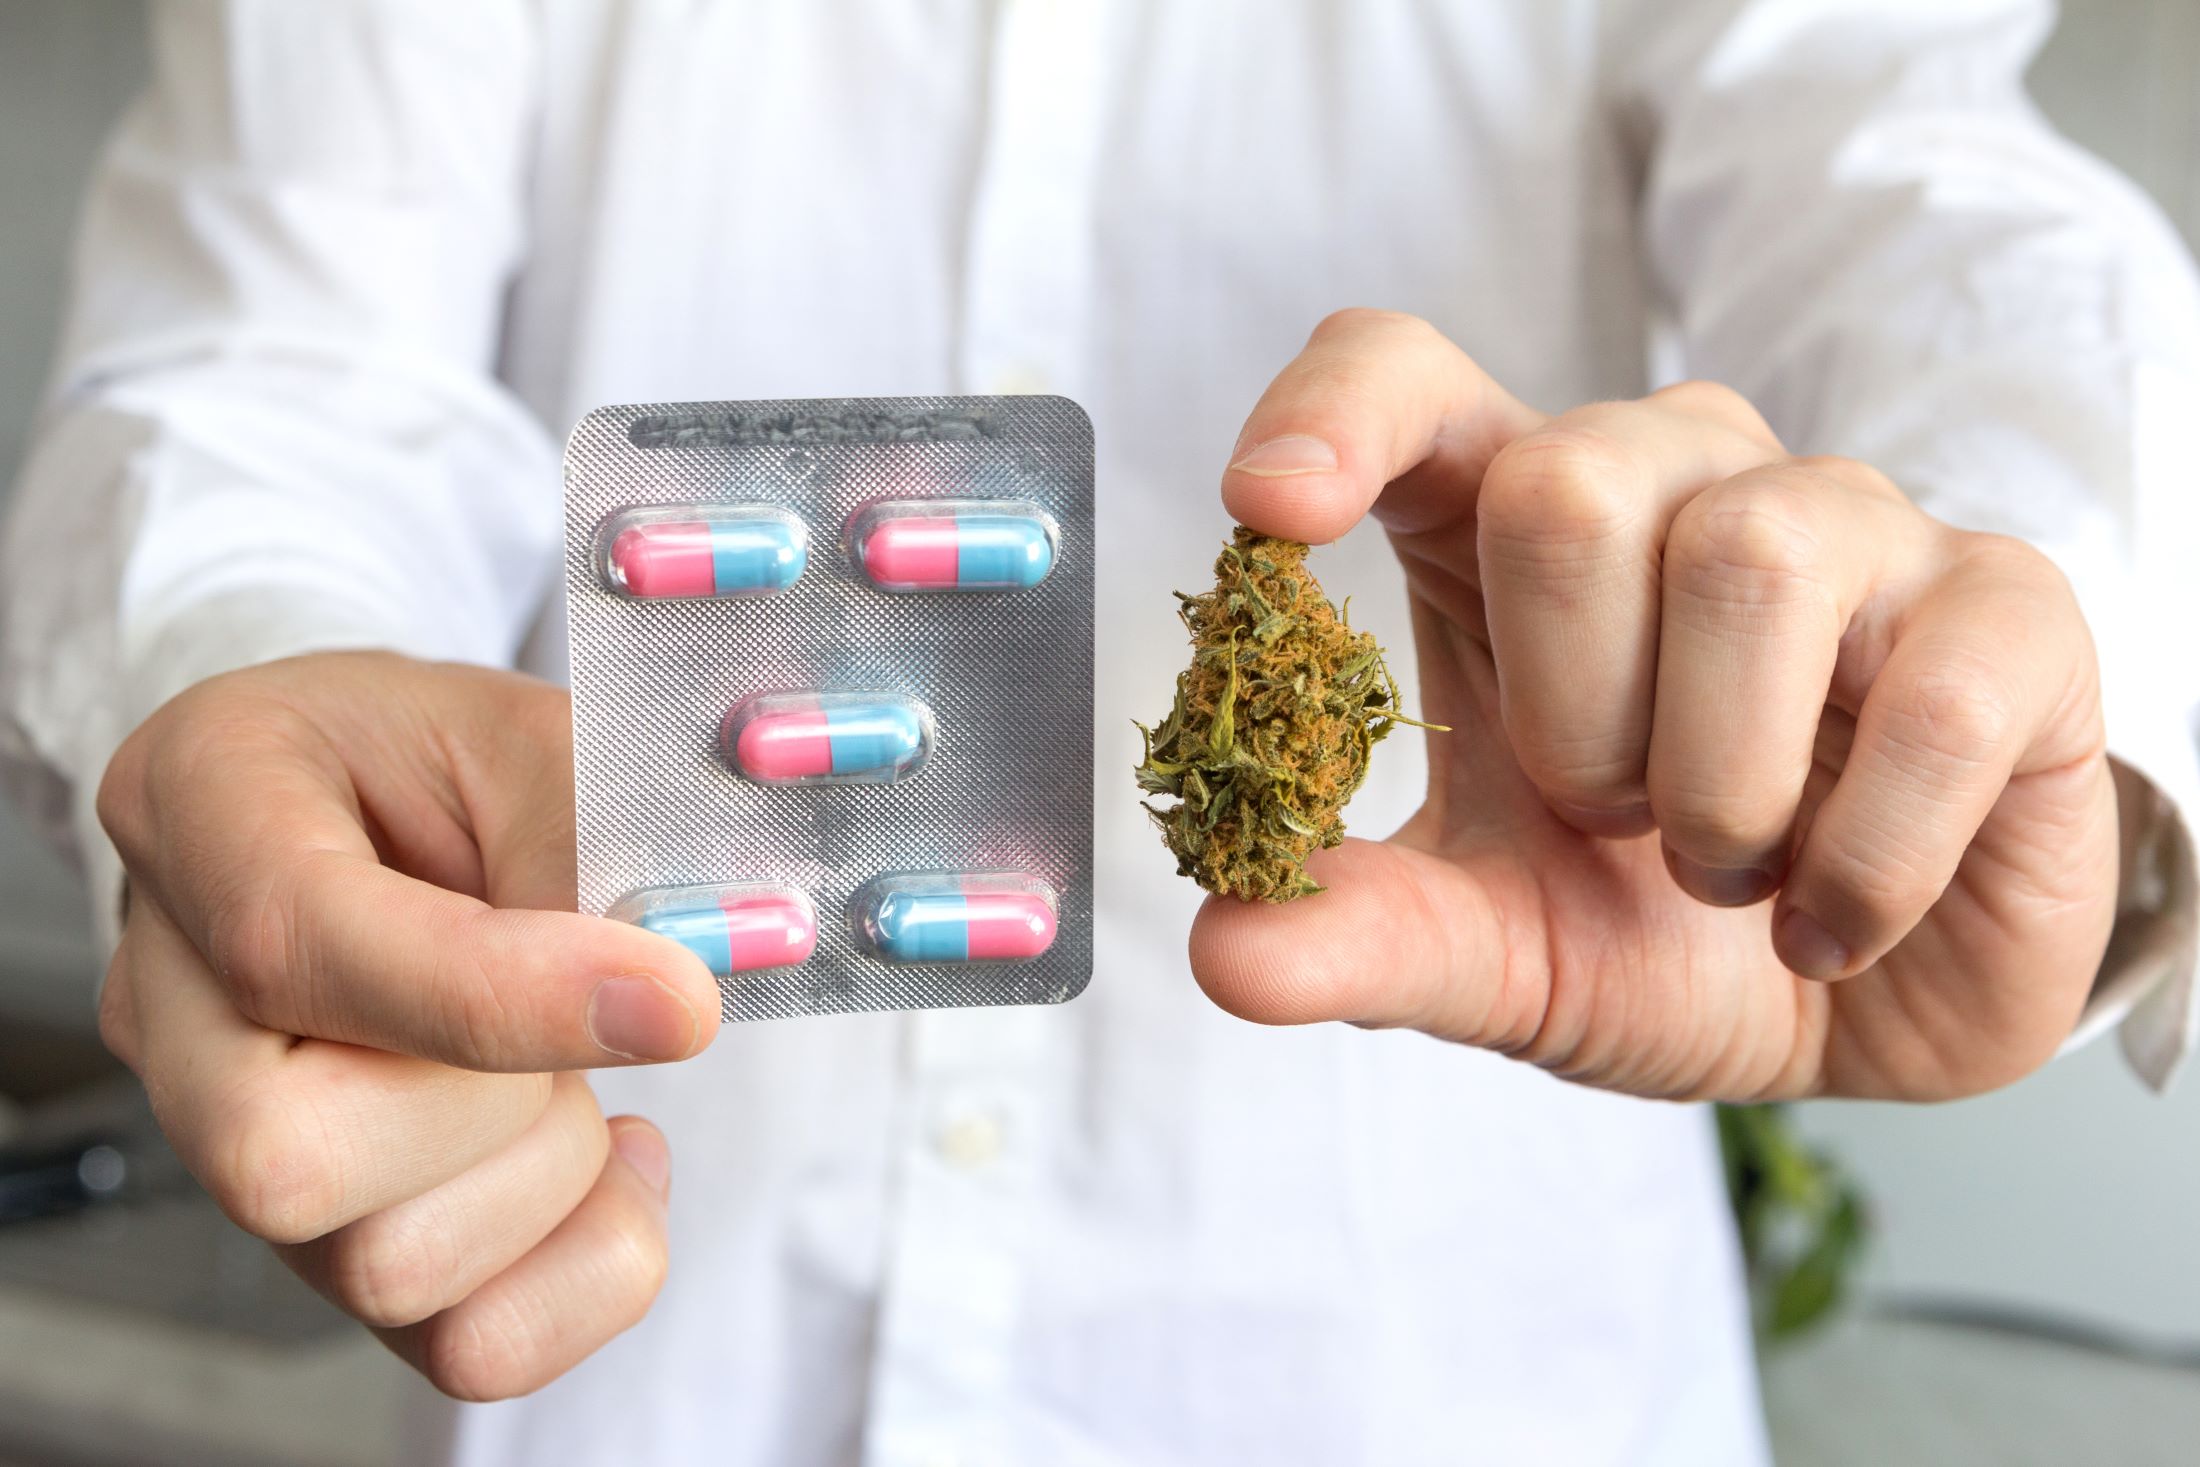 Will Cannabis Affect Other Medications I Take